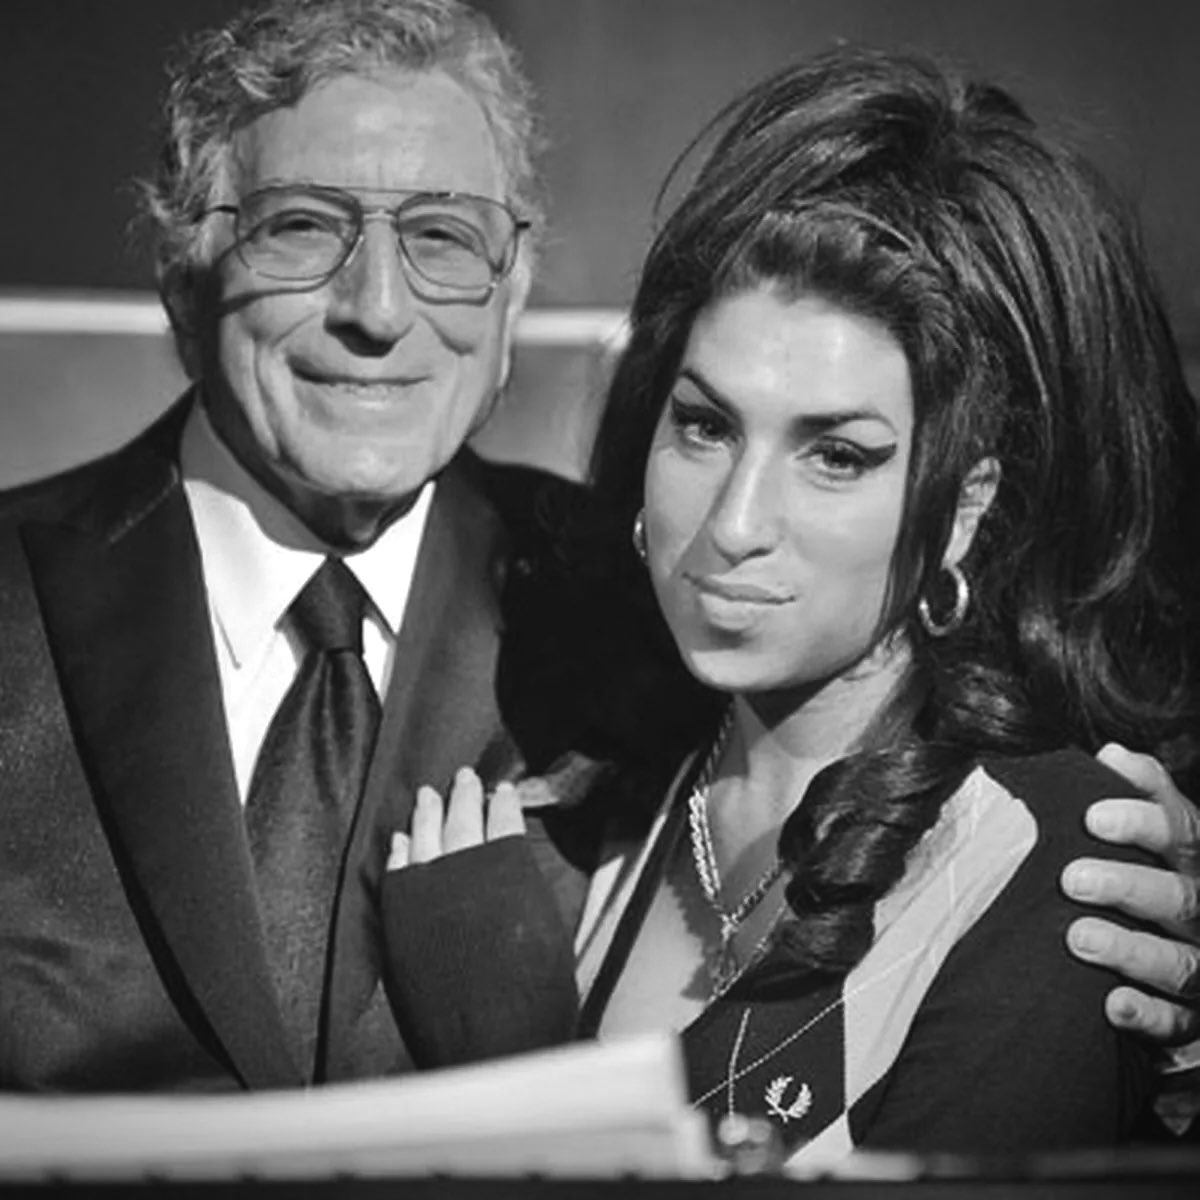 I was never really a fan of Tony Bennett’s music but seeing the way he treated a clearly struggling Amy Winehouse (in @asifkapadia’s excellent #Amy documentary) with such kindness and compassion showed me the measure of the man. The world is a little dimmer today. RIP Tony.